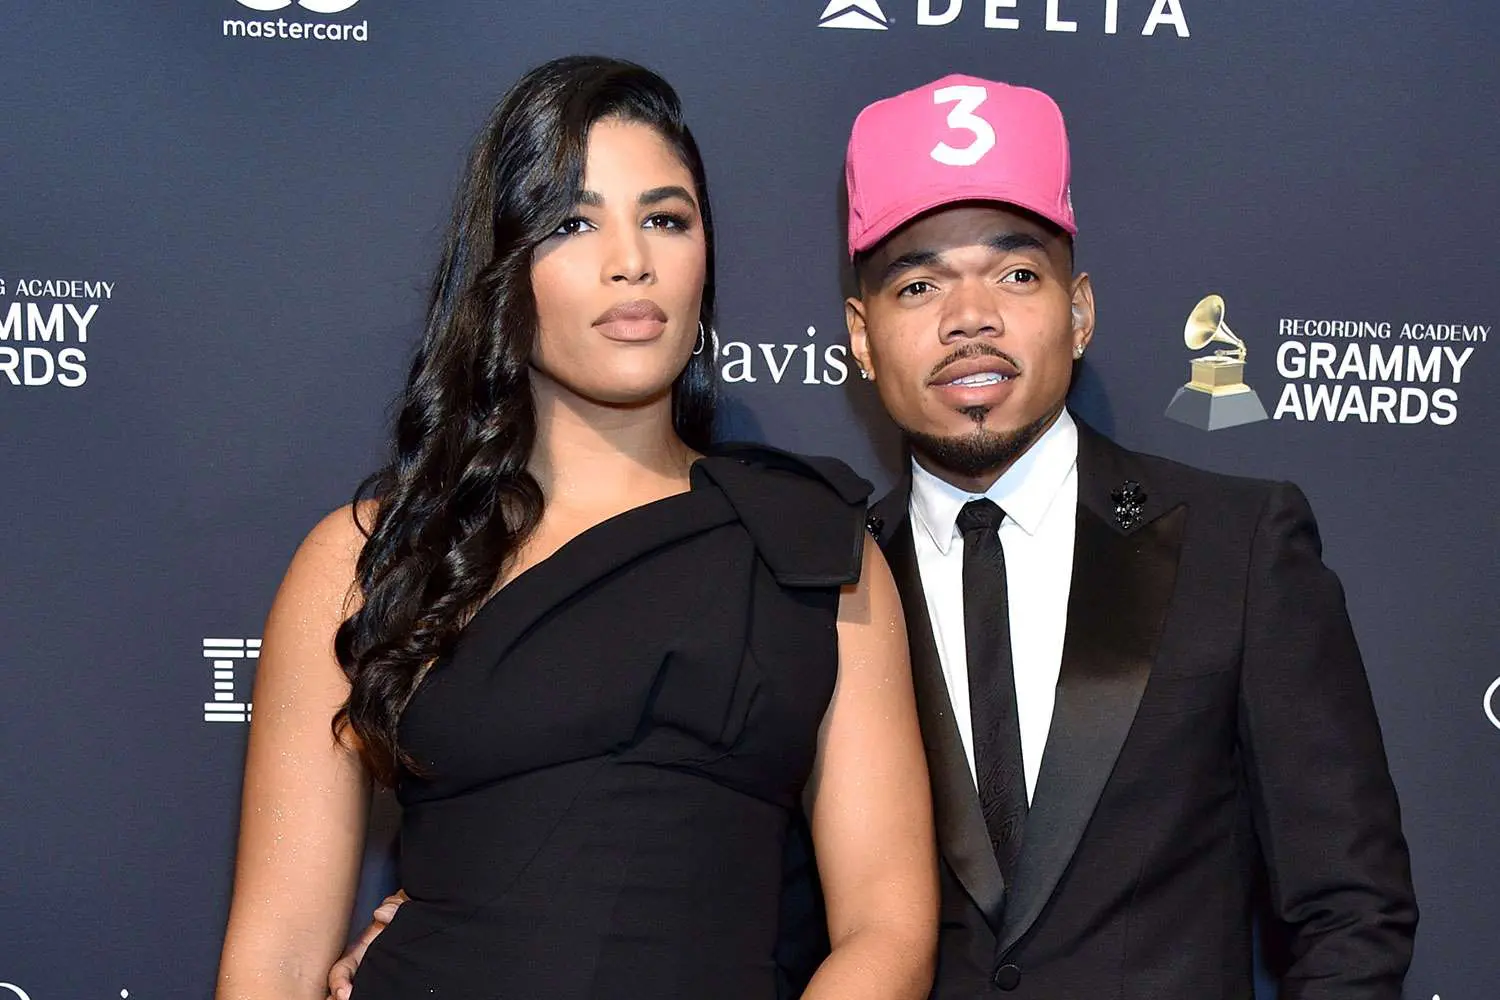 Kristen Corley, Chance The Rapper’s wife, has filed for divorce.